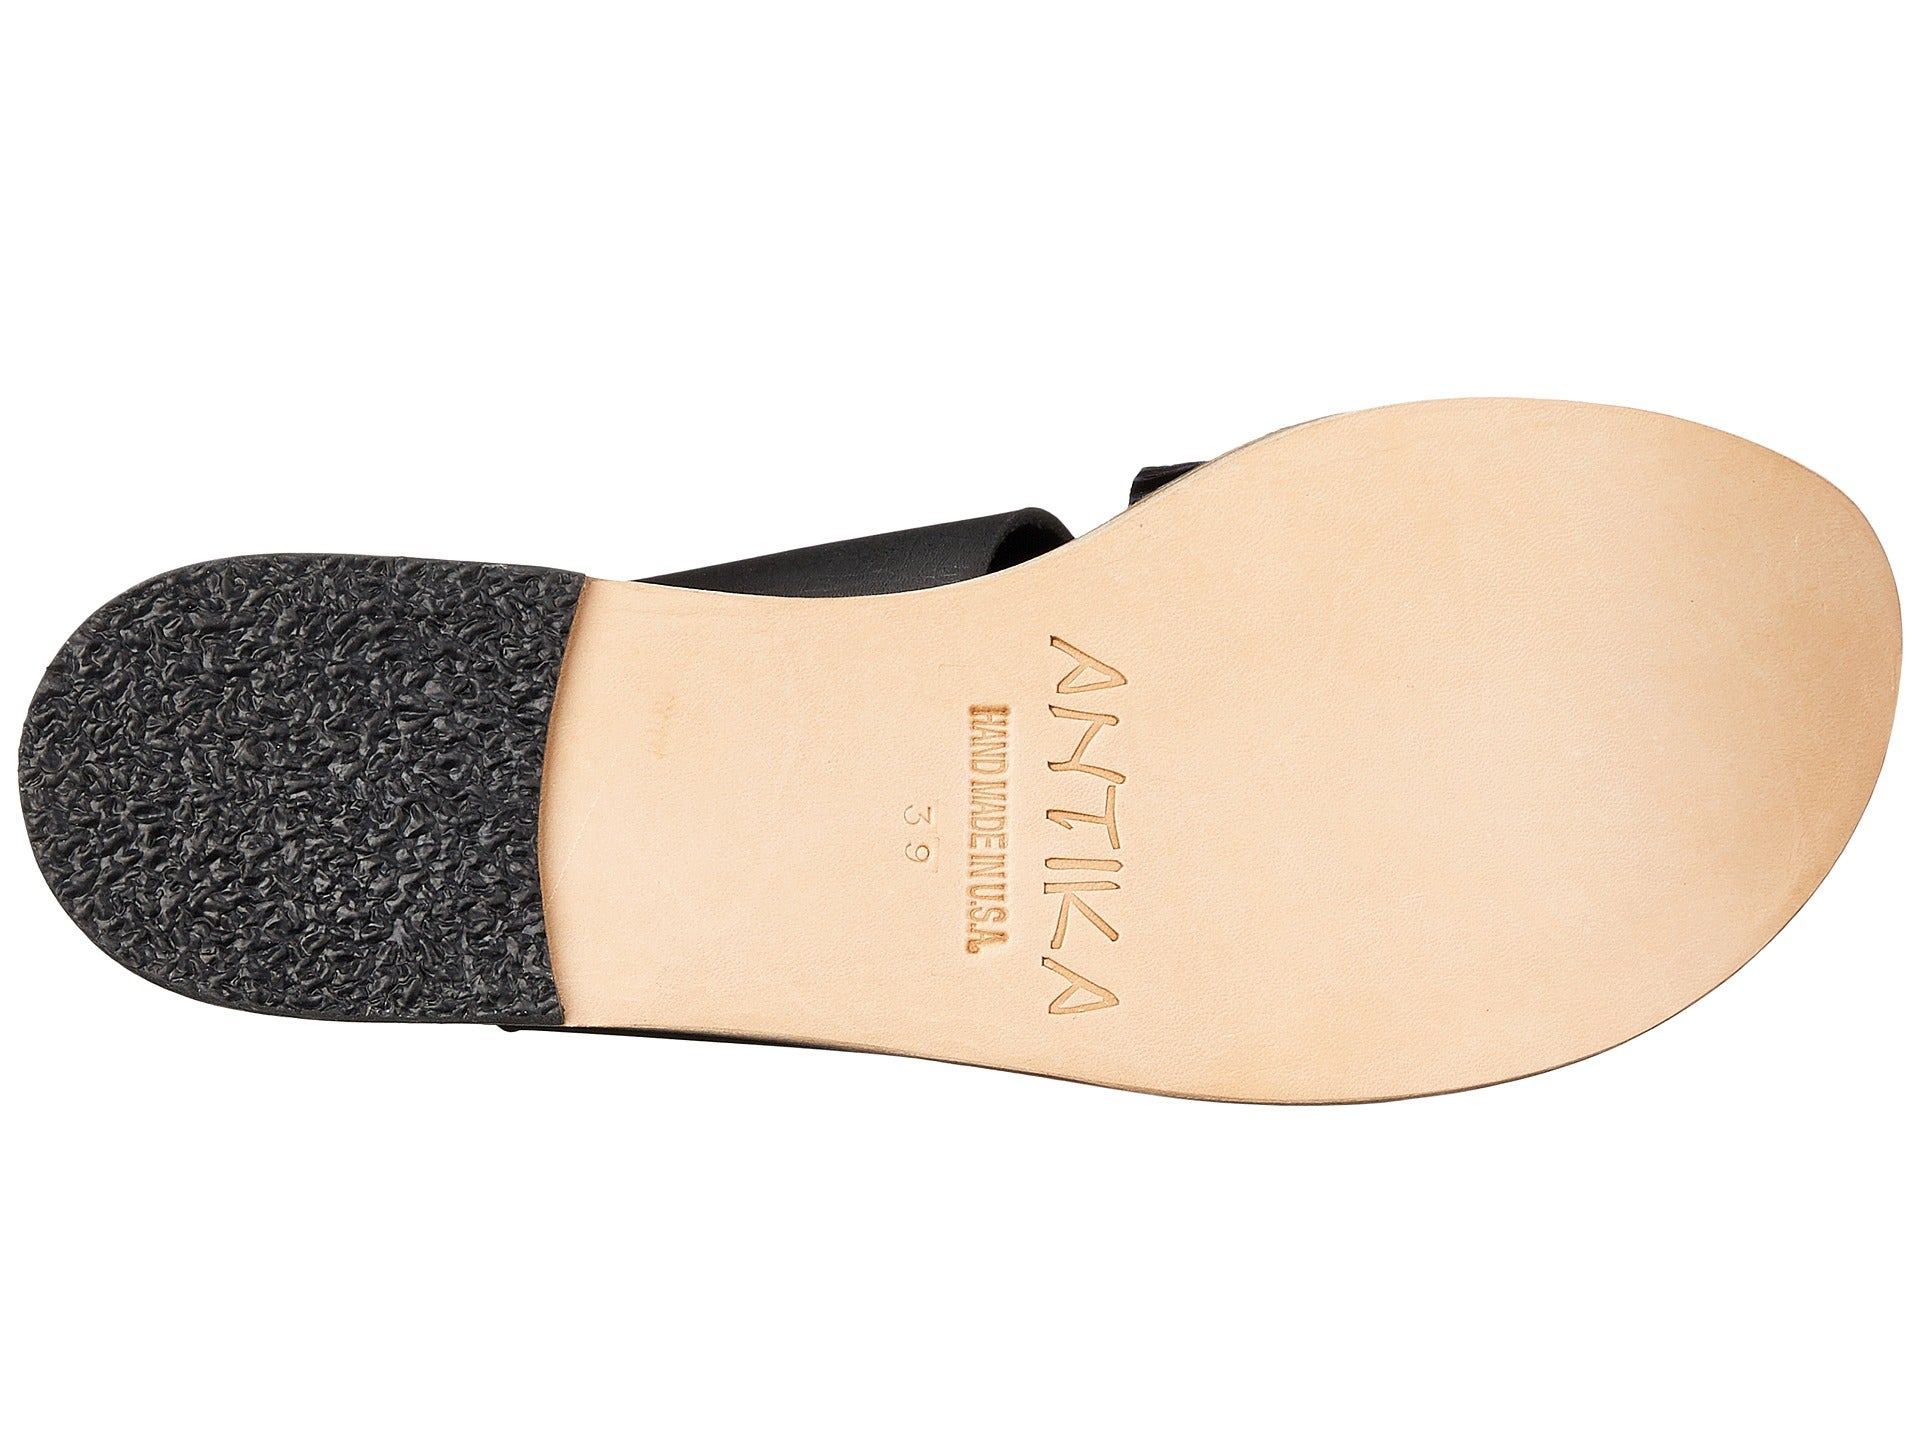 Abbot Kinney Blvd black snake, handmade leather buckle sandals with front toe loop - sole View